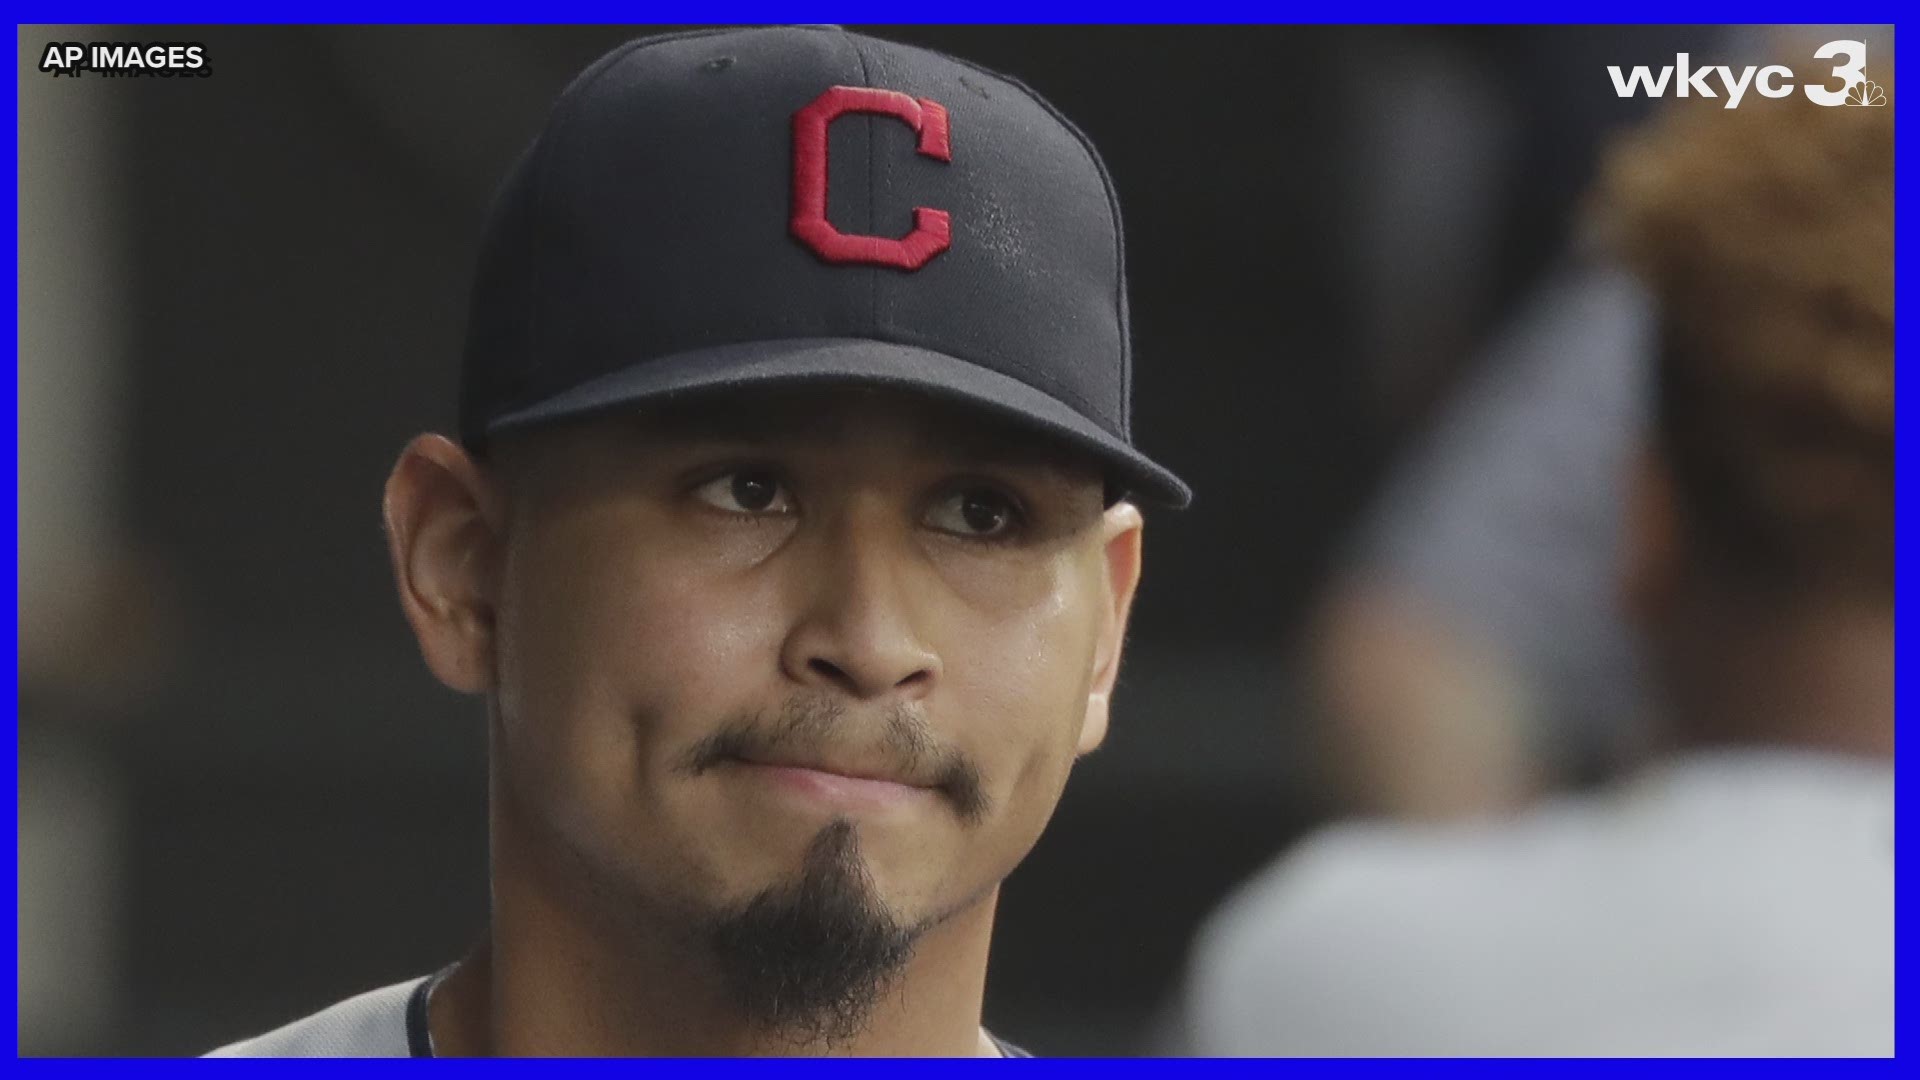 Cookie is coming back!  Cleveland Indians pitcher Carlos Carrasco is not far from making his return to the majors just three months after being diagnosed with leukemia.